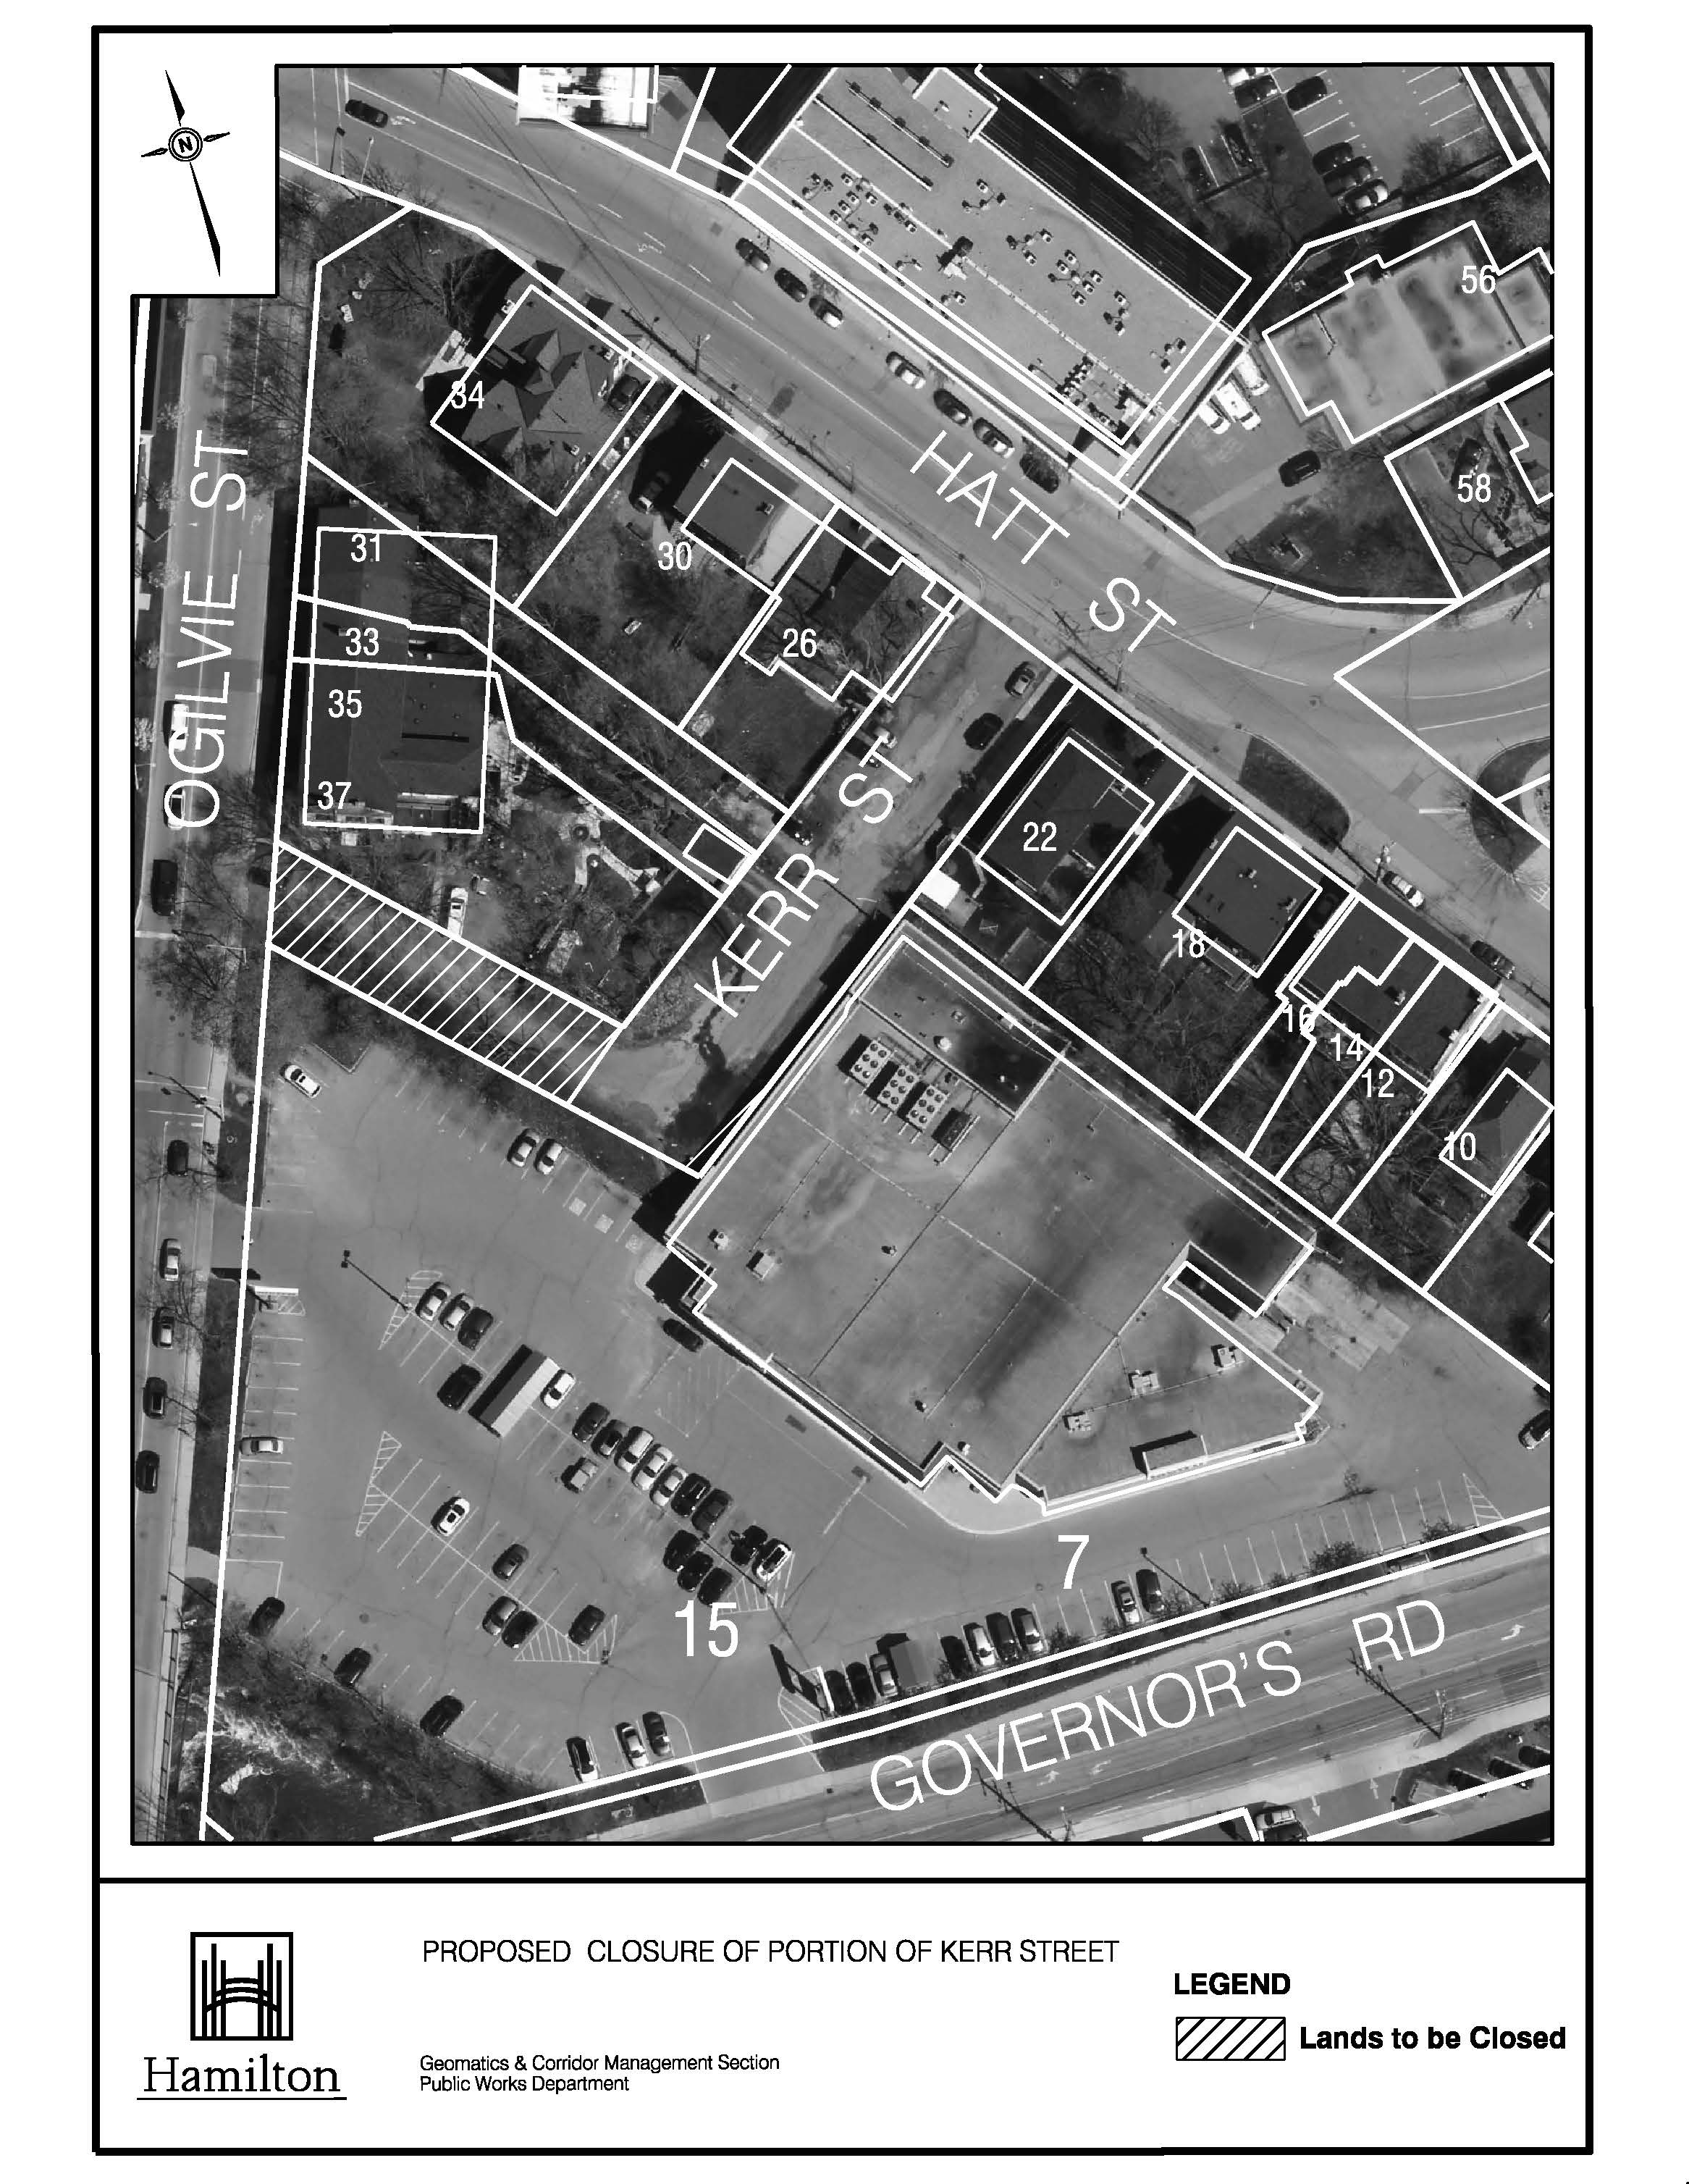 Ariel photograph of proposed closure of portion of Kerr Street